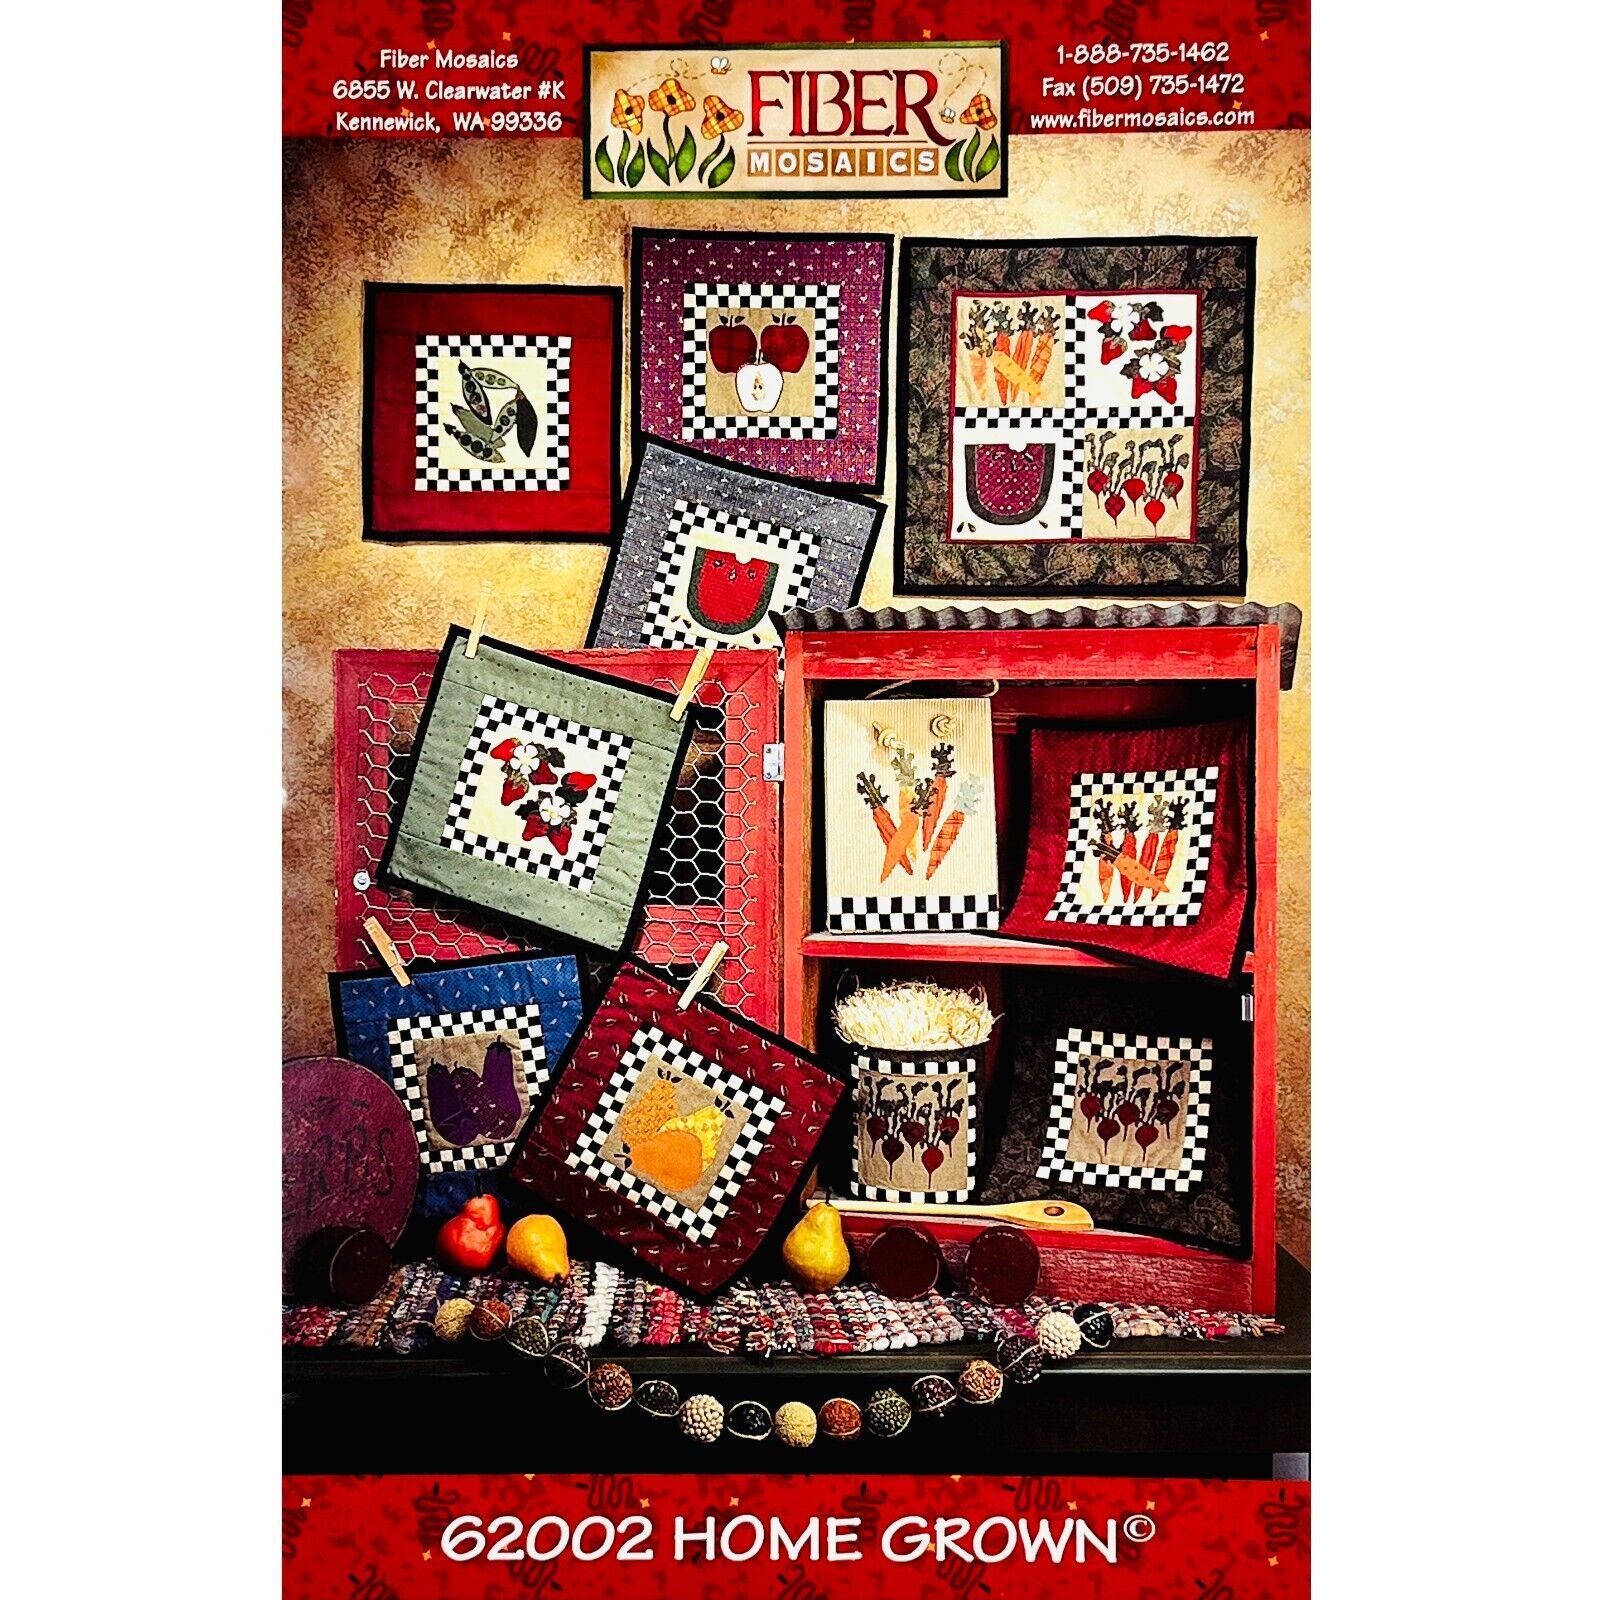 Home Grown Quilt PATTERN 62002 Fruit and Veggie Kitchen Quilts by Fiber Mosaics - $9.99